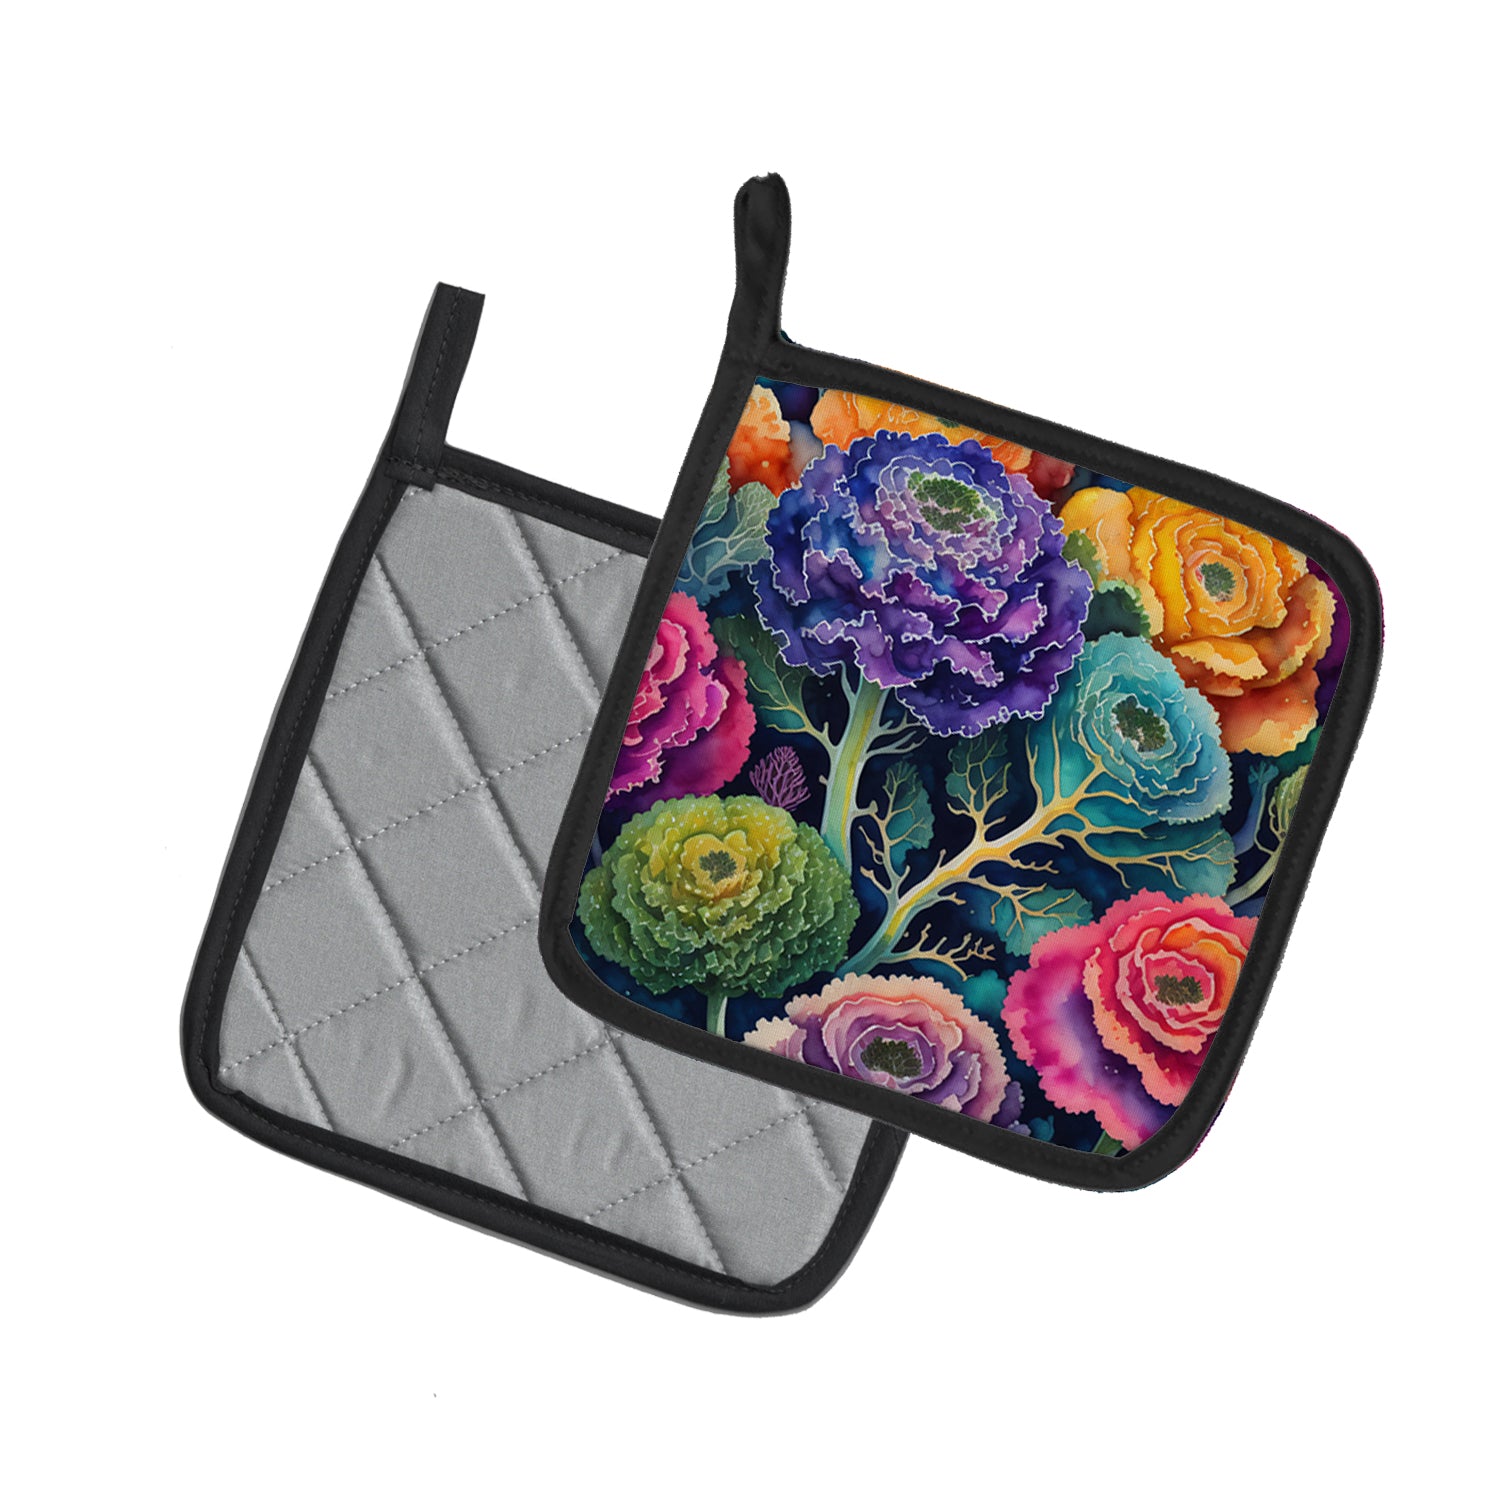 Buy this Colorful Ornamental Kale Pair of Pot Holders